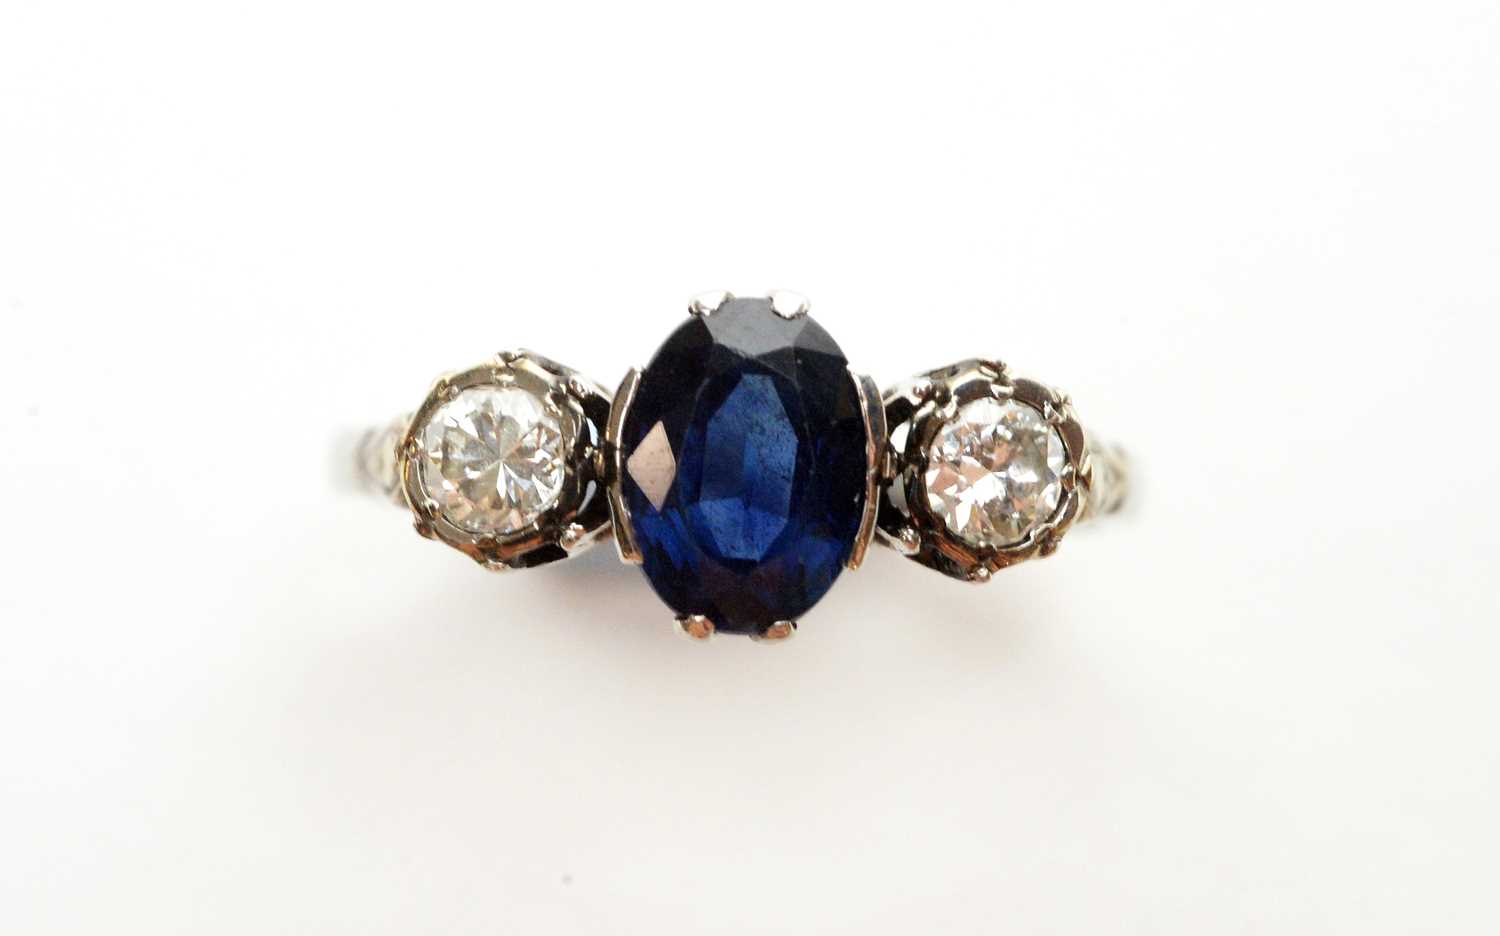 Lot 4 - A sapphire and diamond ring